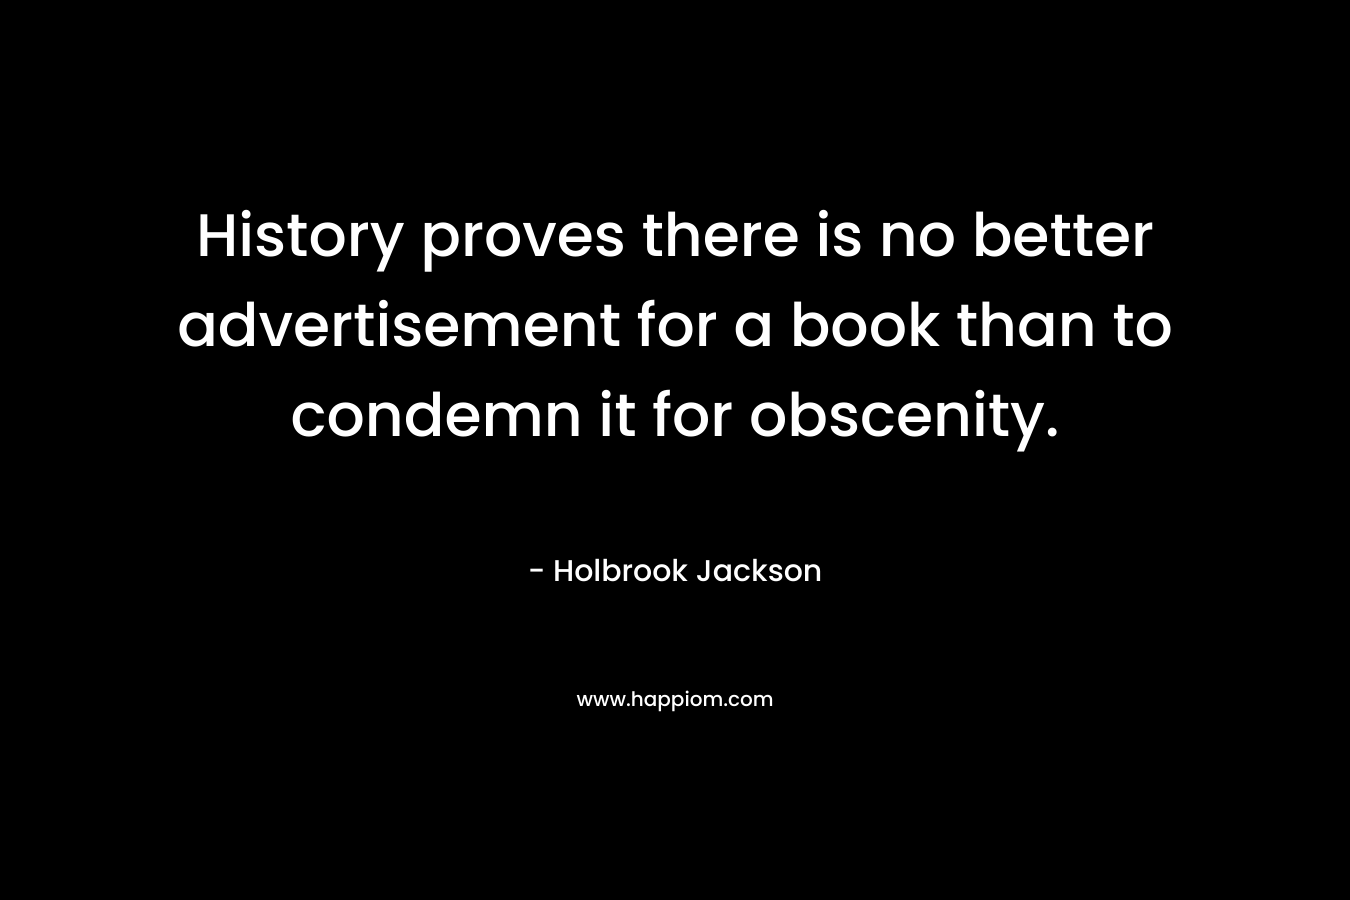 History proves there is no better advertisement for a book than to condemn it for obscenity. – Holbrook Jackson